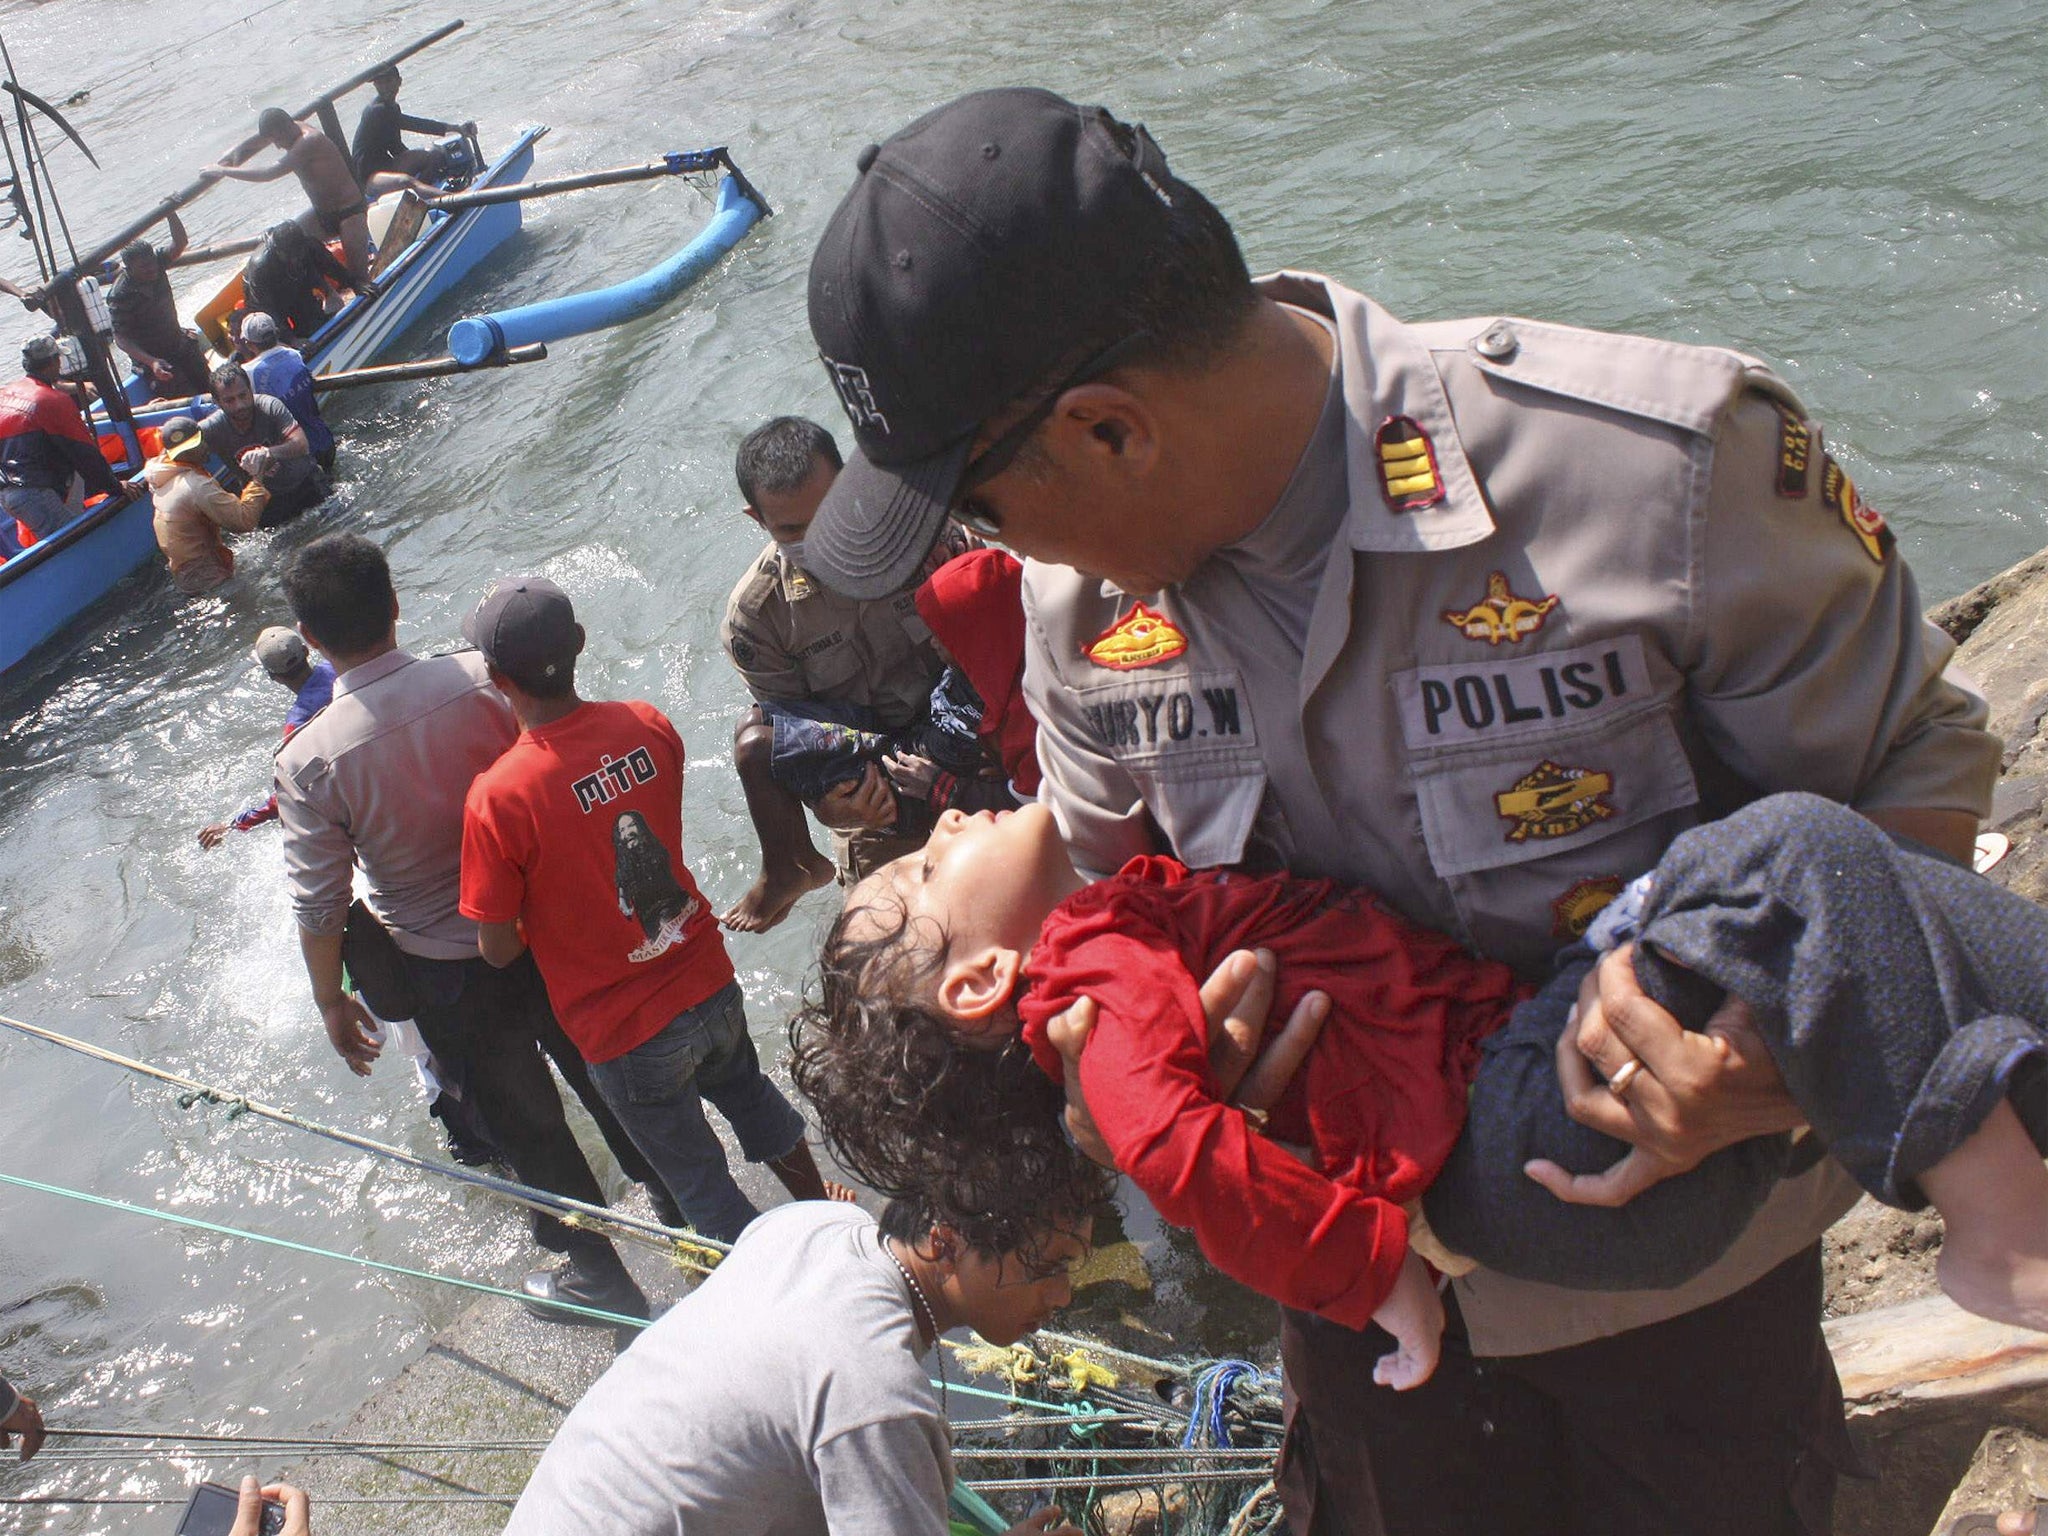 A police officer carries a child survivor who was on the boat full of asylum seekers that capsized off the coast of Sukapura, Indonesia. Nine people died but 189 refugees were rescued